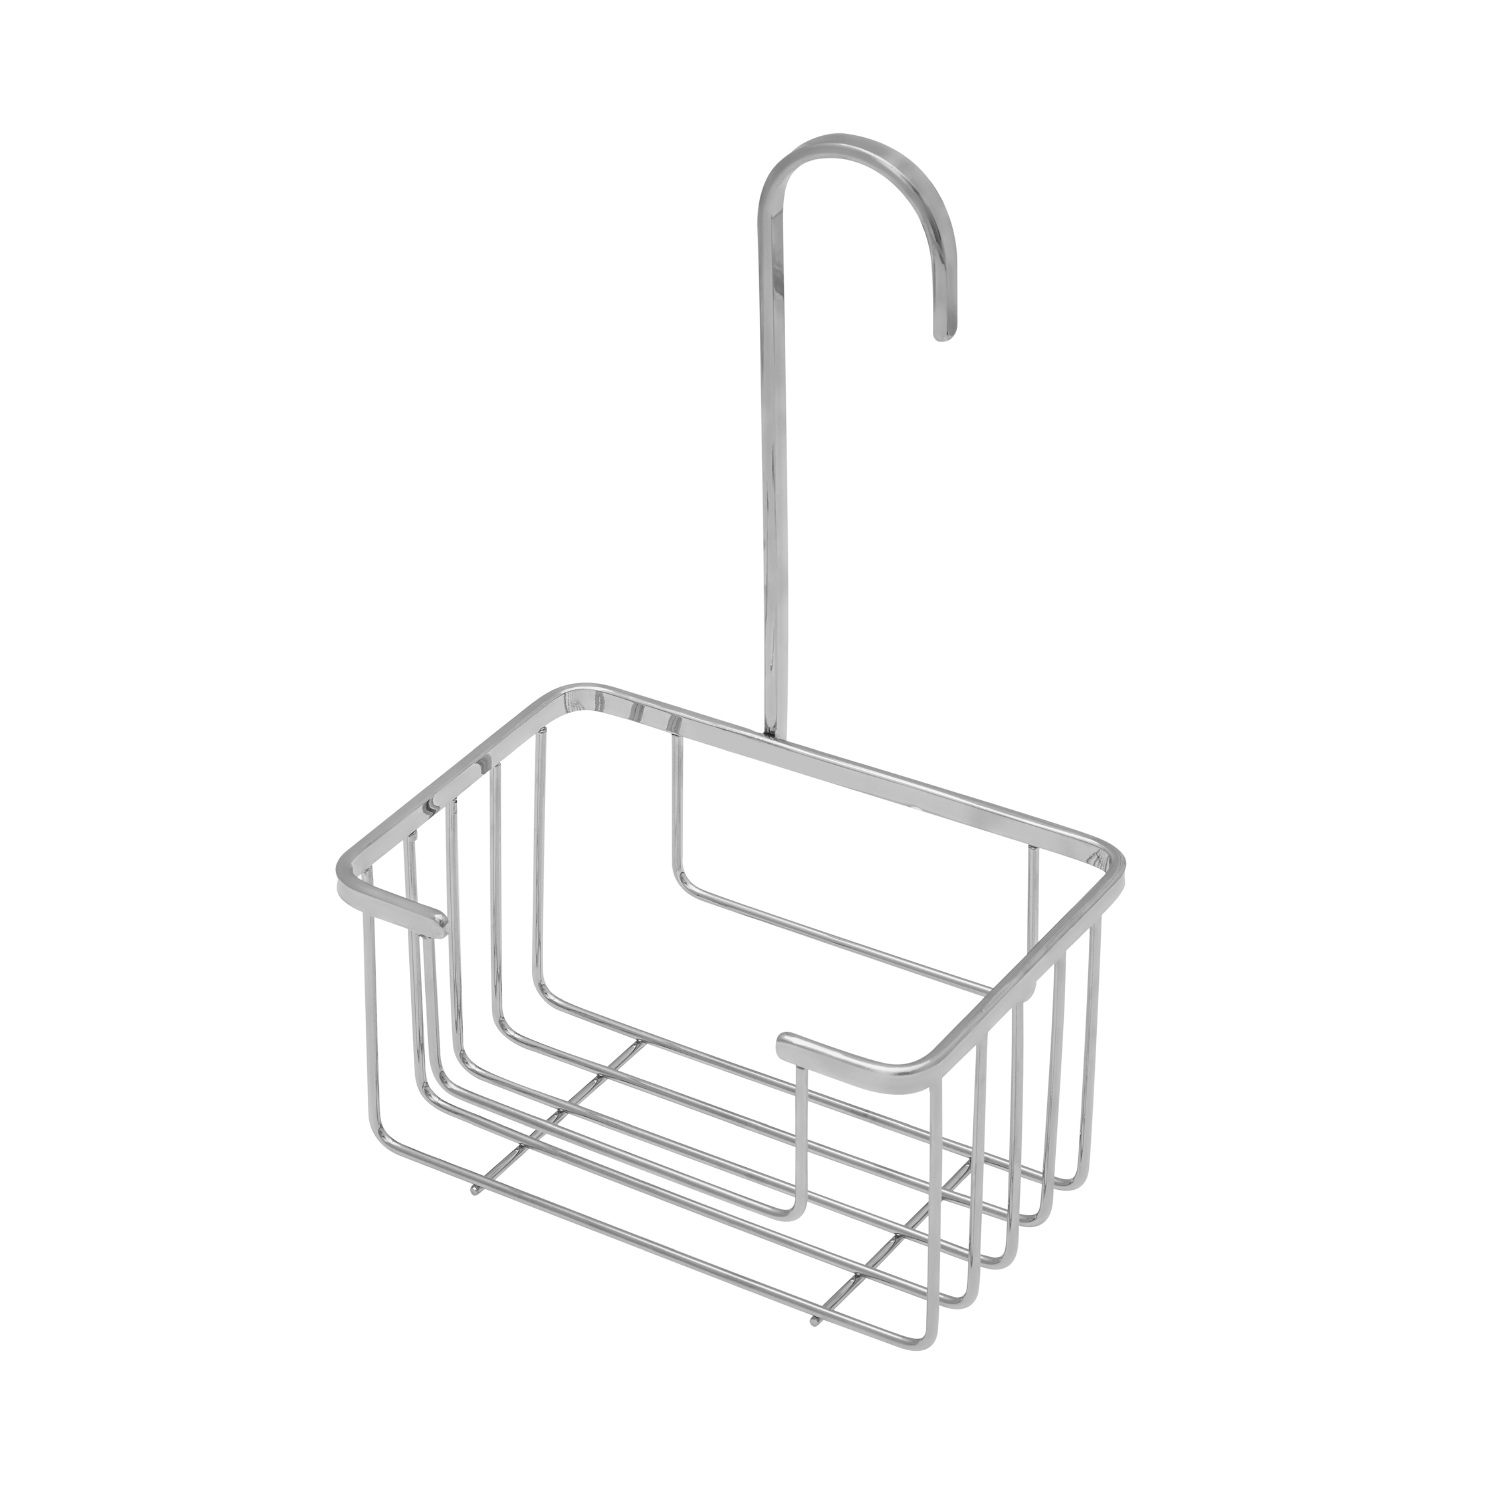 Hanging Shower Caddy - Silver Image